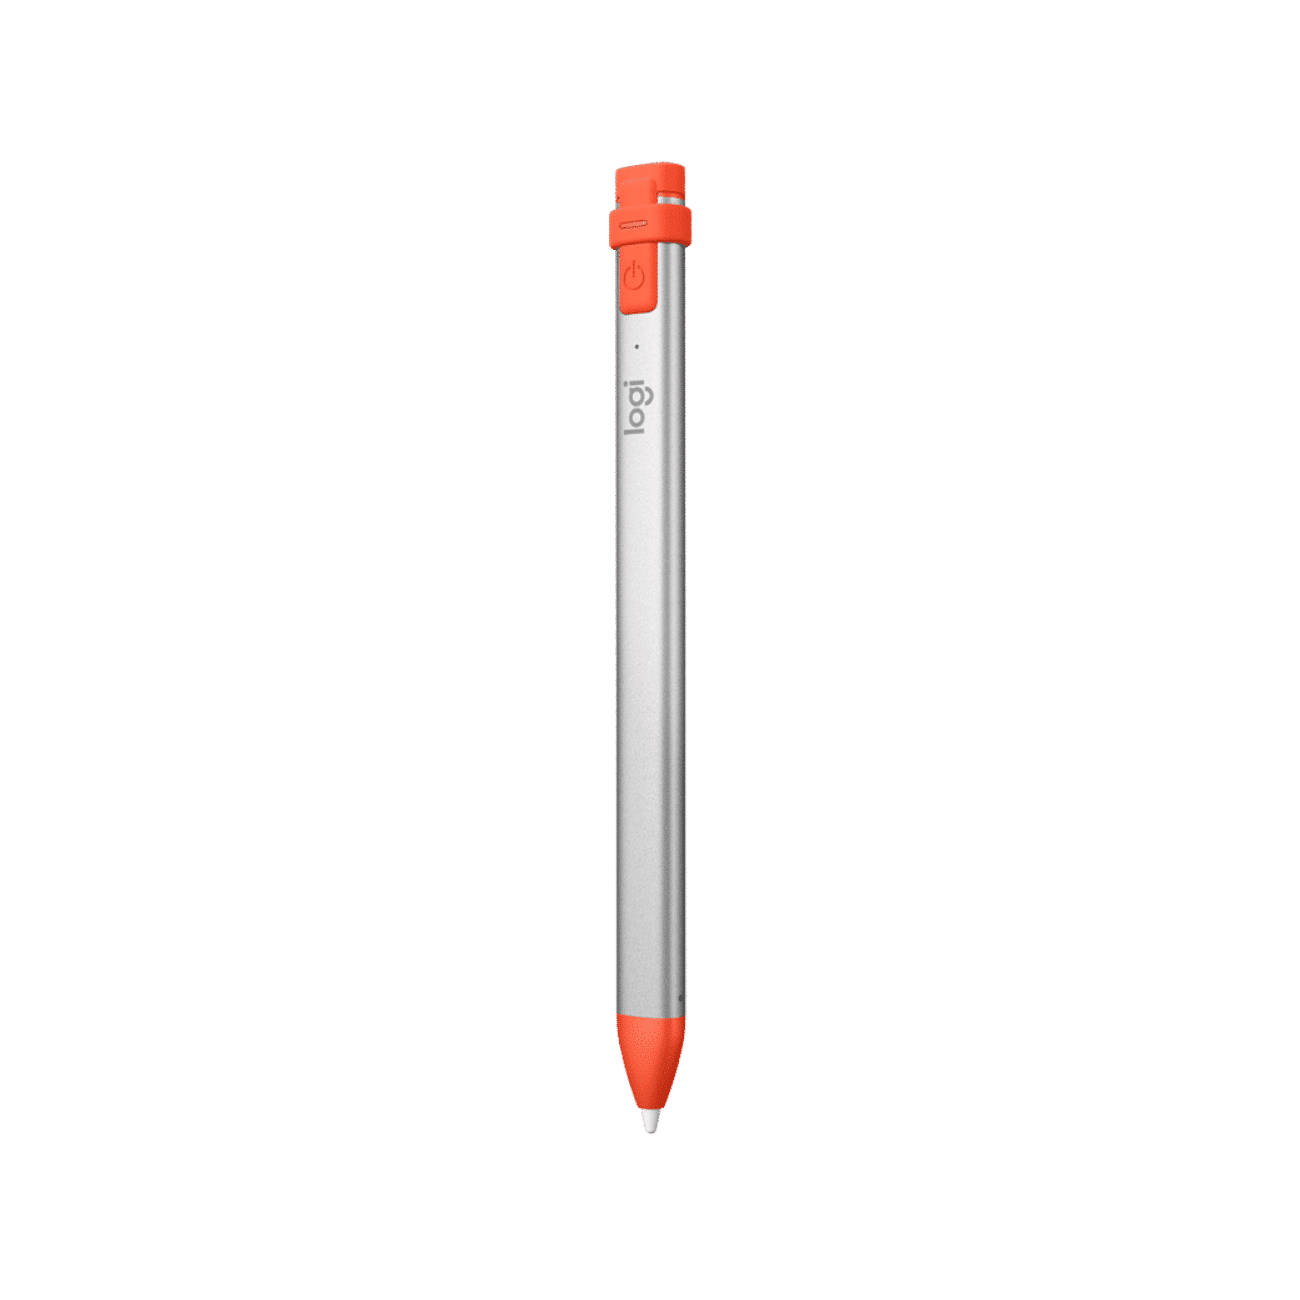 logitech crayon in orange and silver